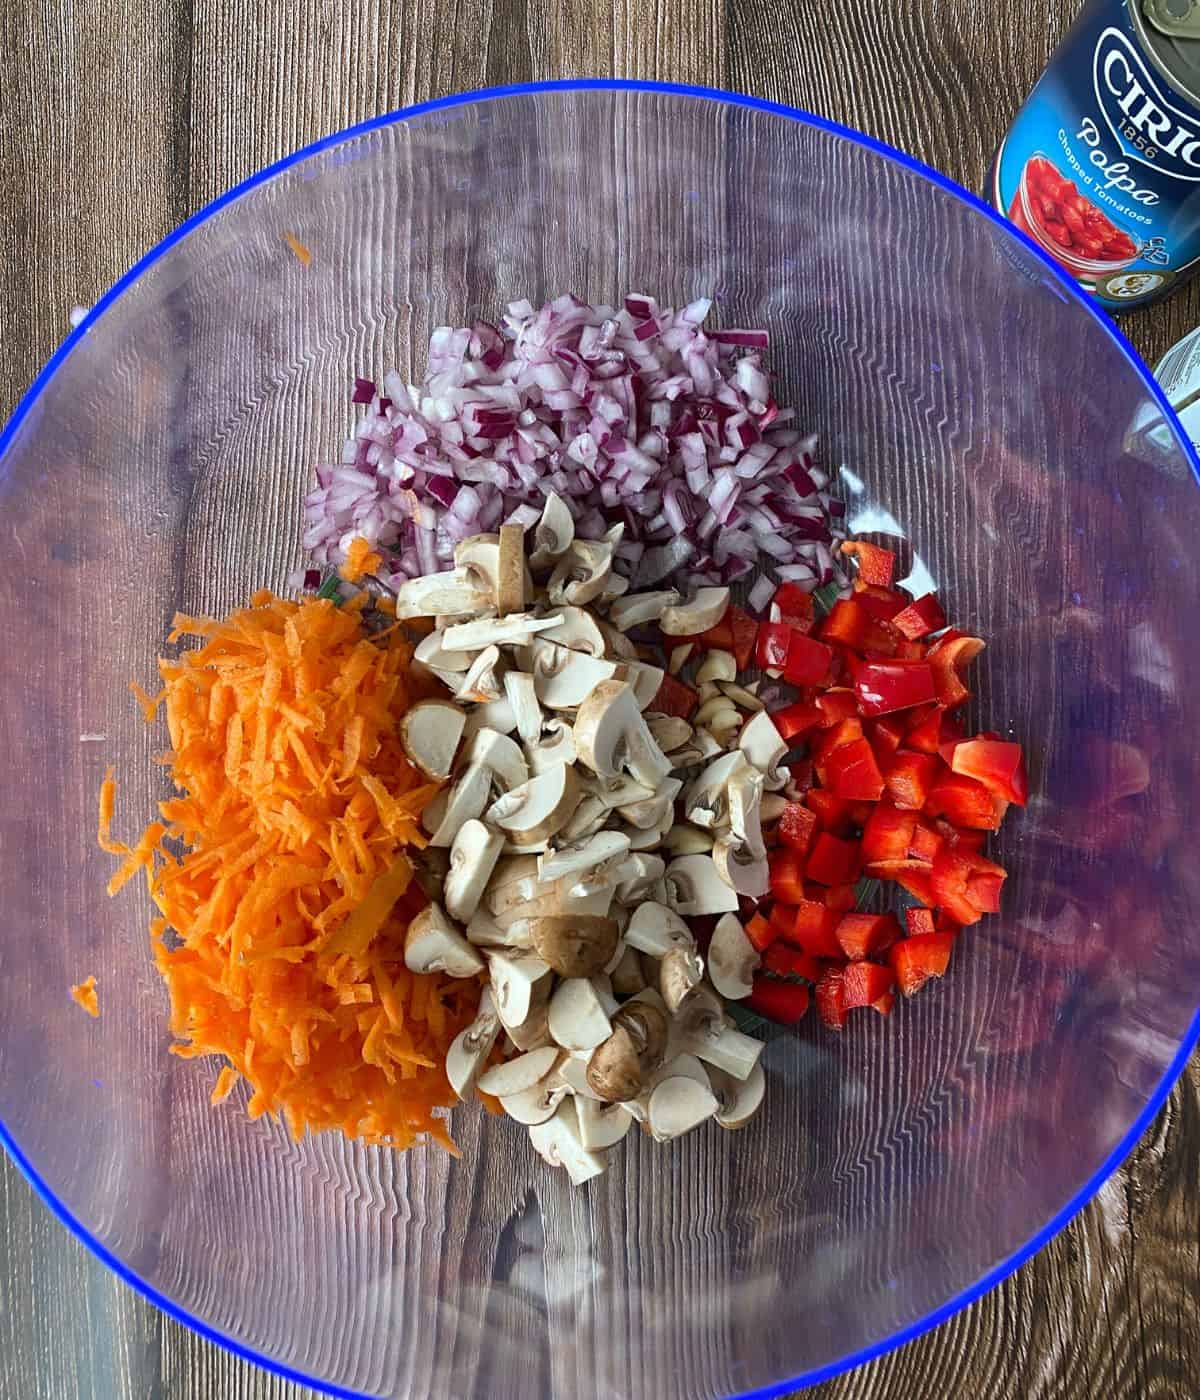 grated carrot, chopped pepper, red onion and mushrooms in a bowl.